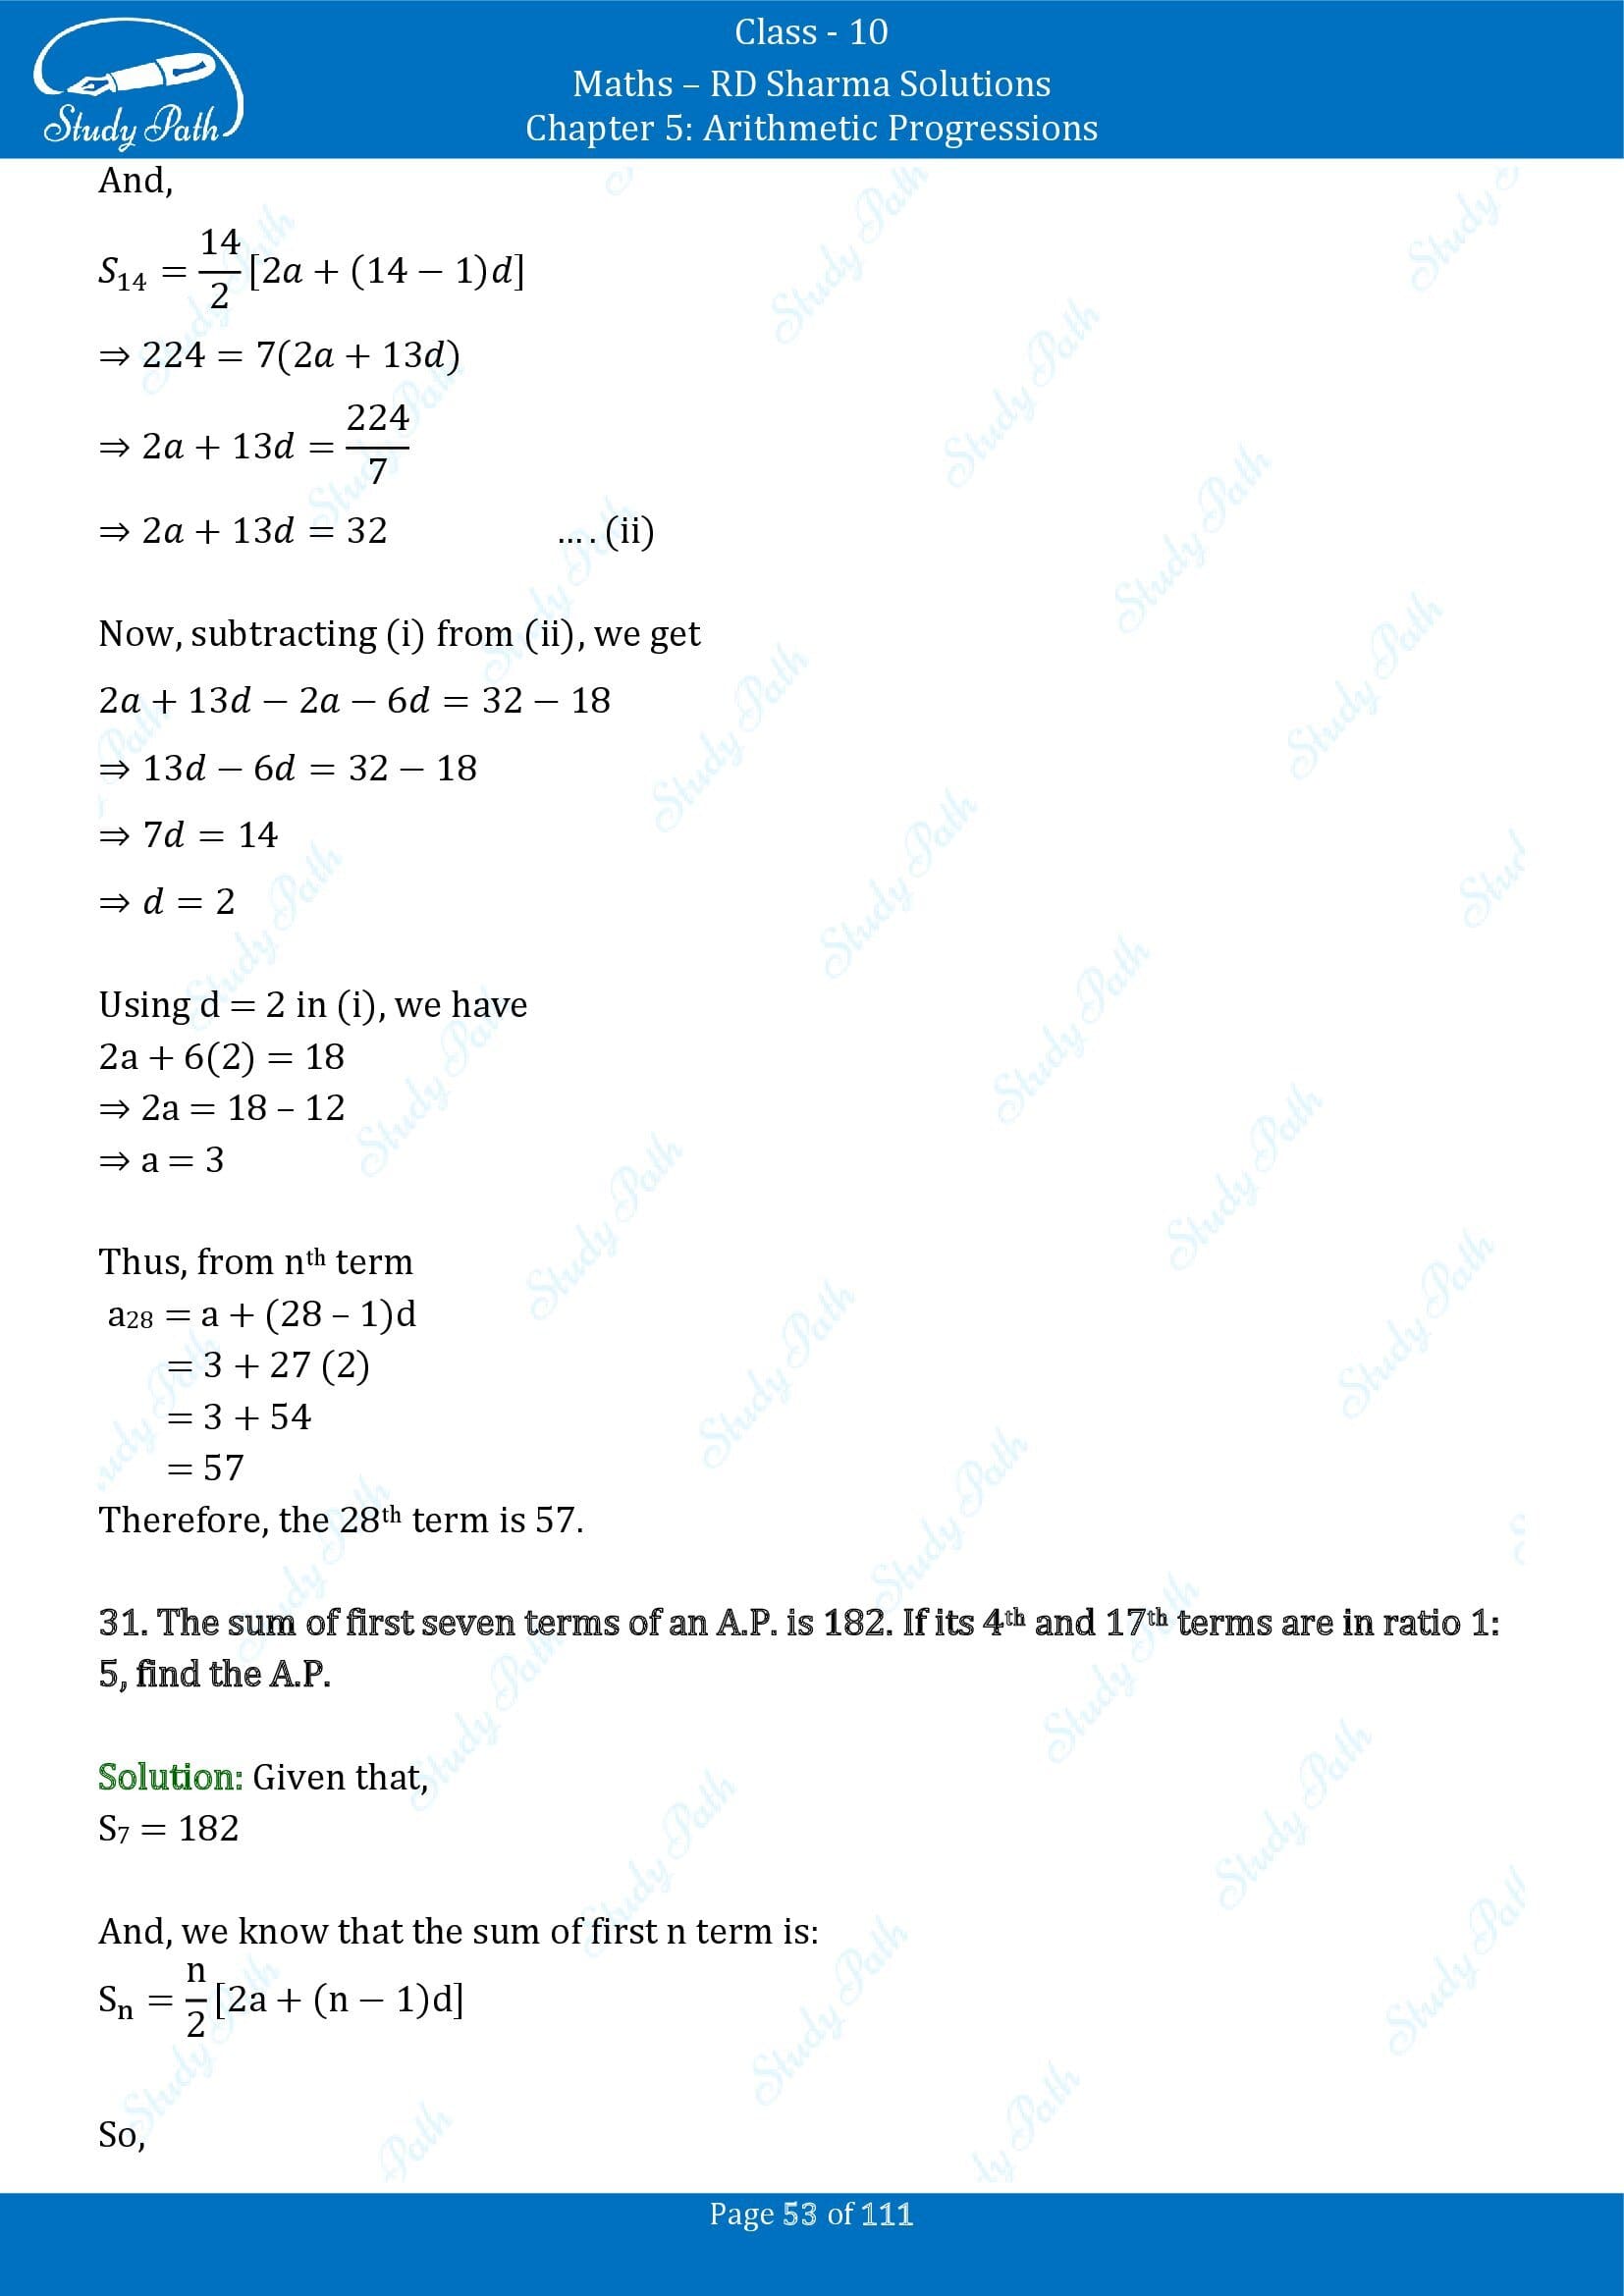 RD Sharma Solutions Class 10 Chapter 5 Arithmetic Progressions Exercise 5.6 00053